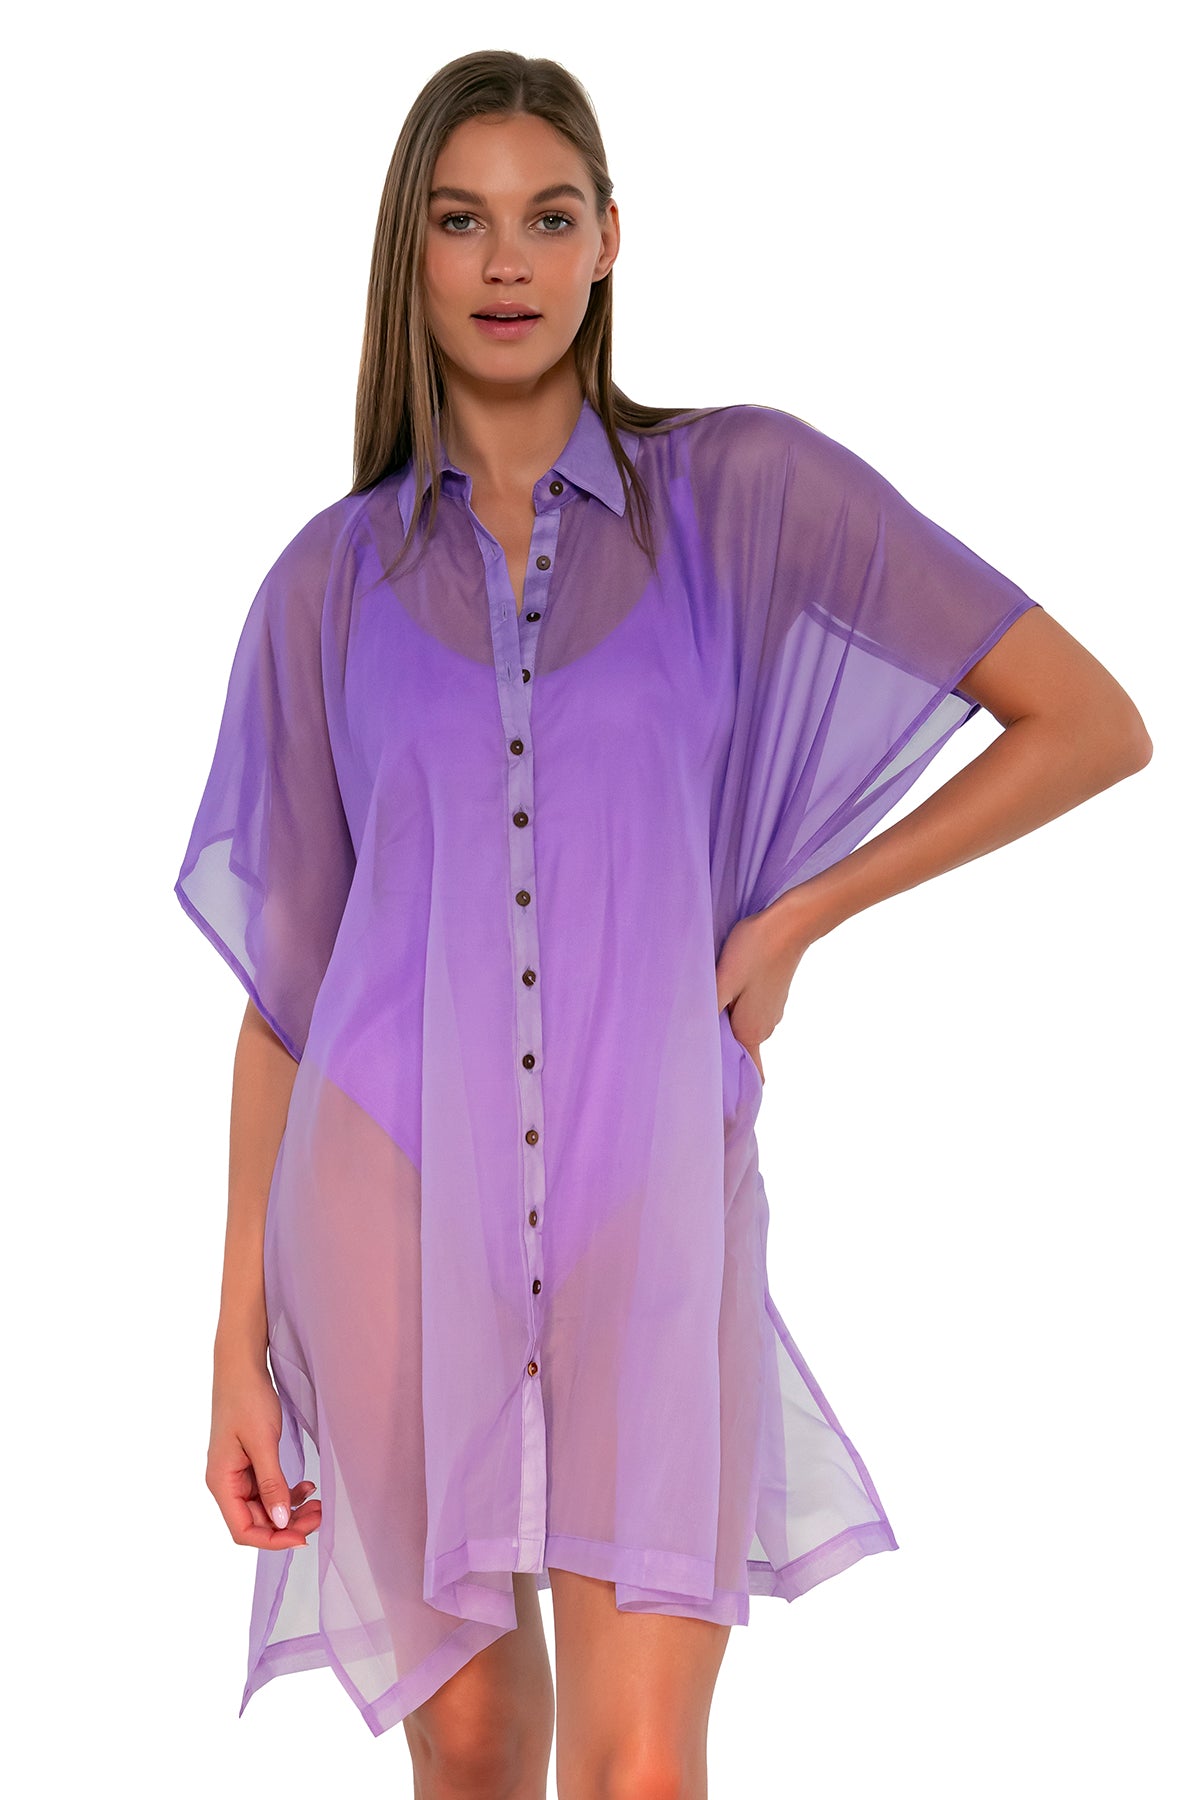 Front Front view of Sunsets Passion Flower Shore Thing Tunic